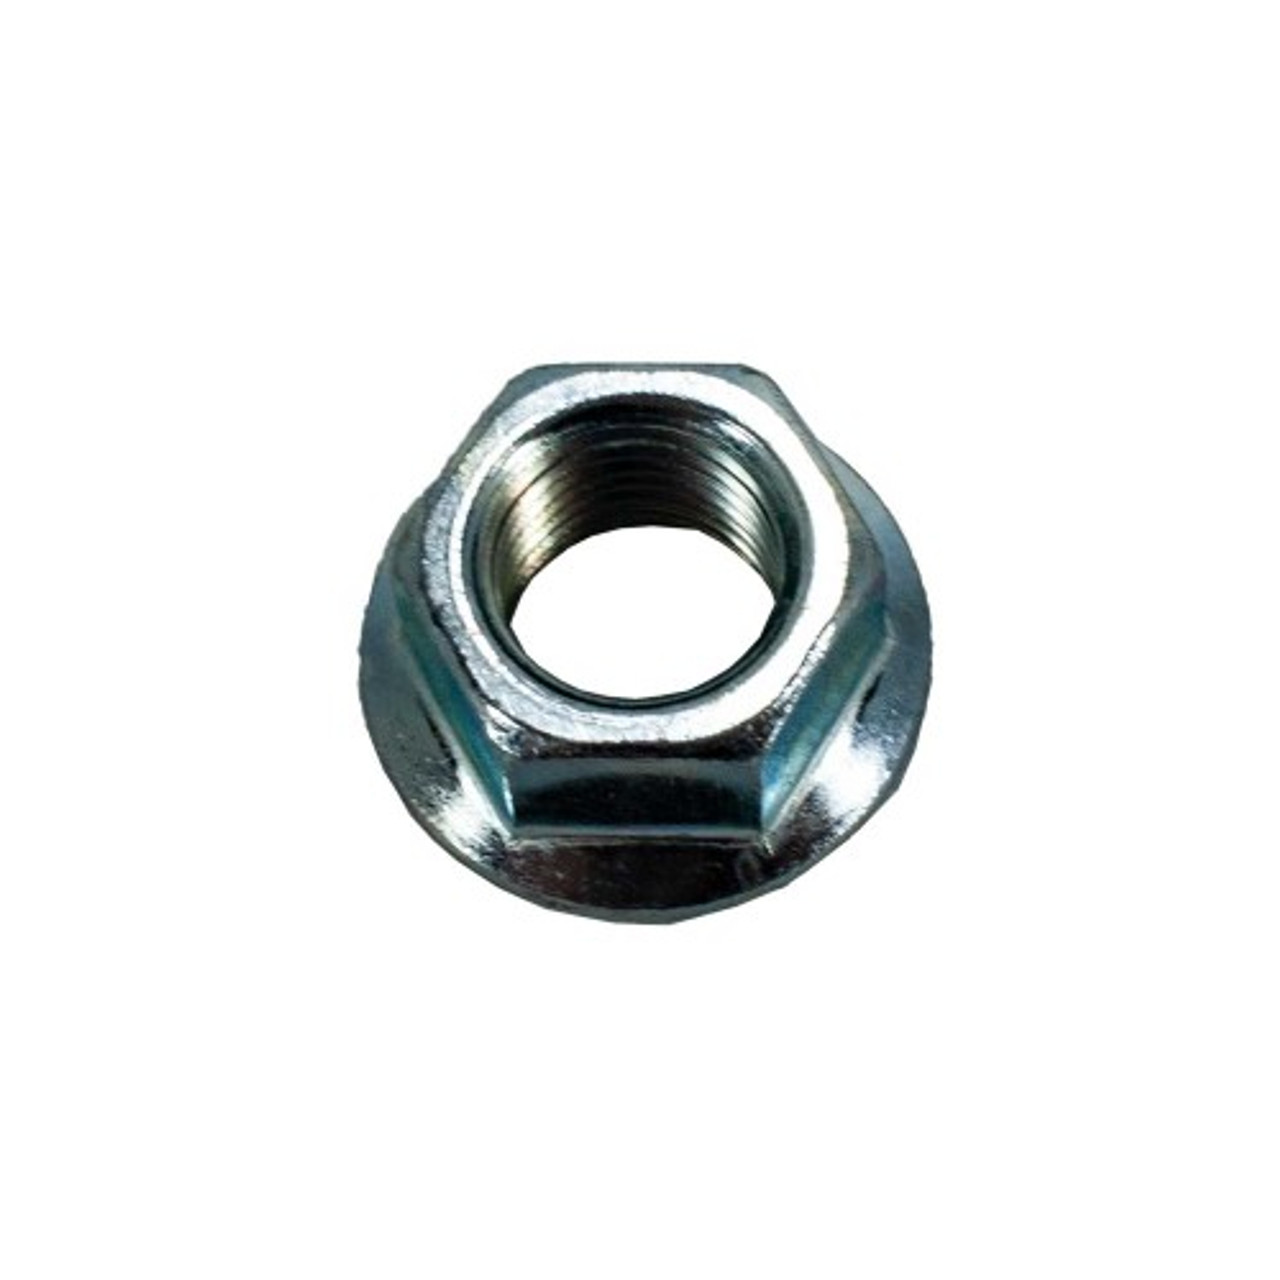 (595) Wolf Rugby 8mm Nut